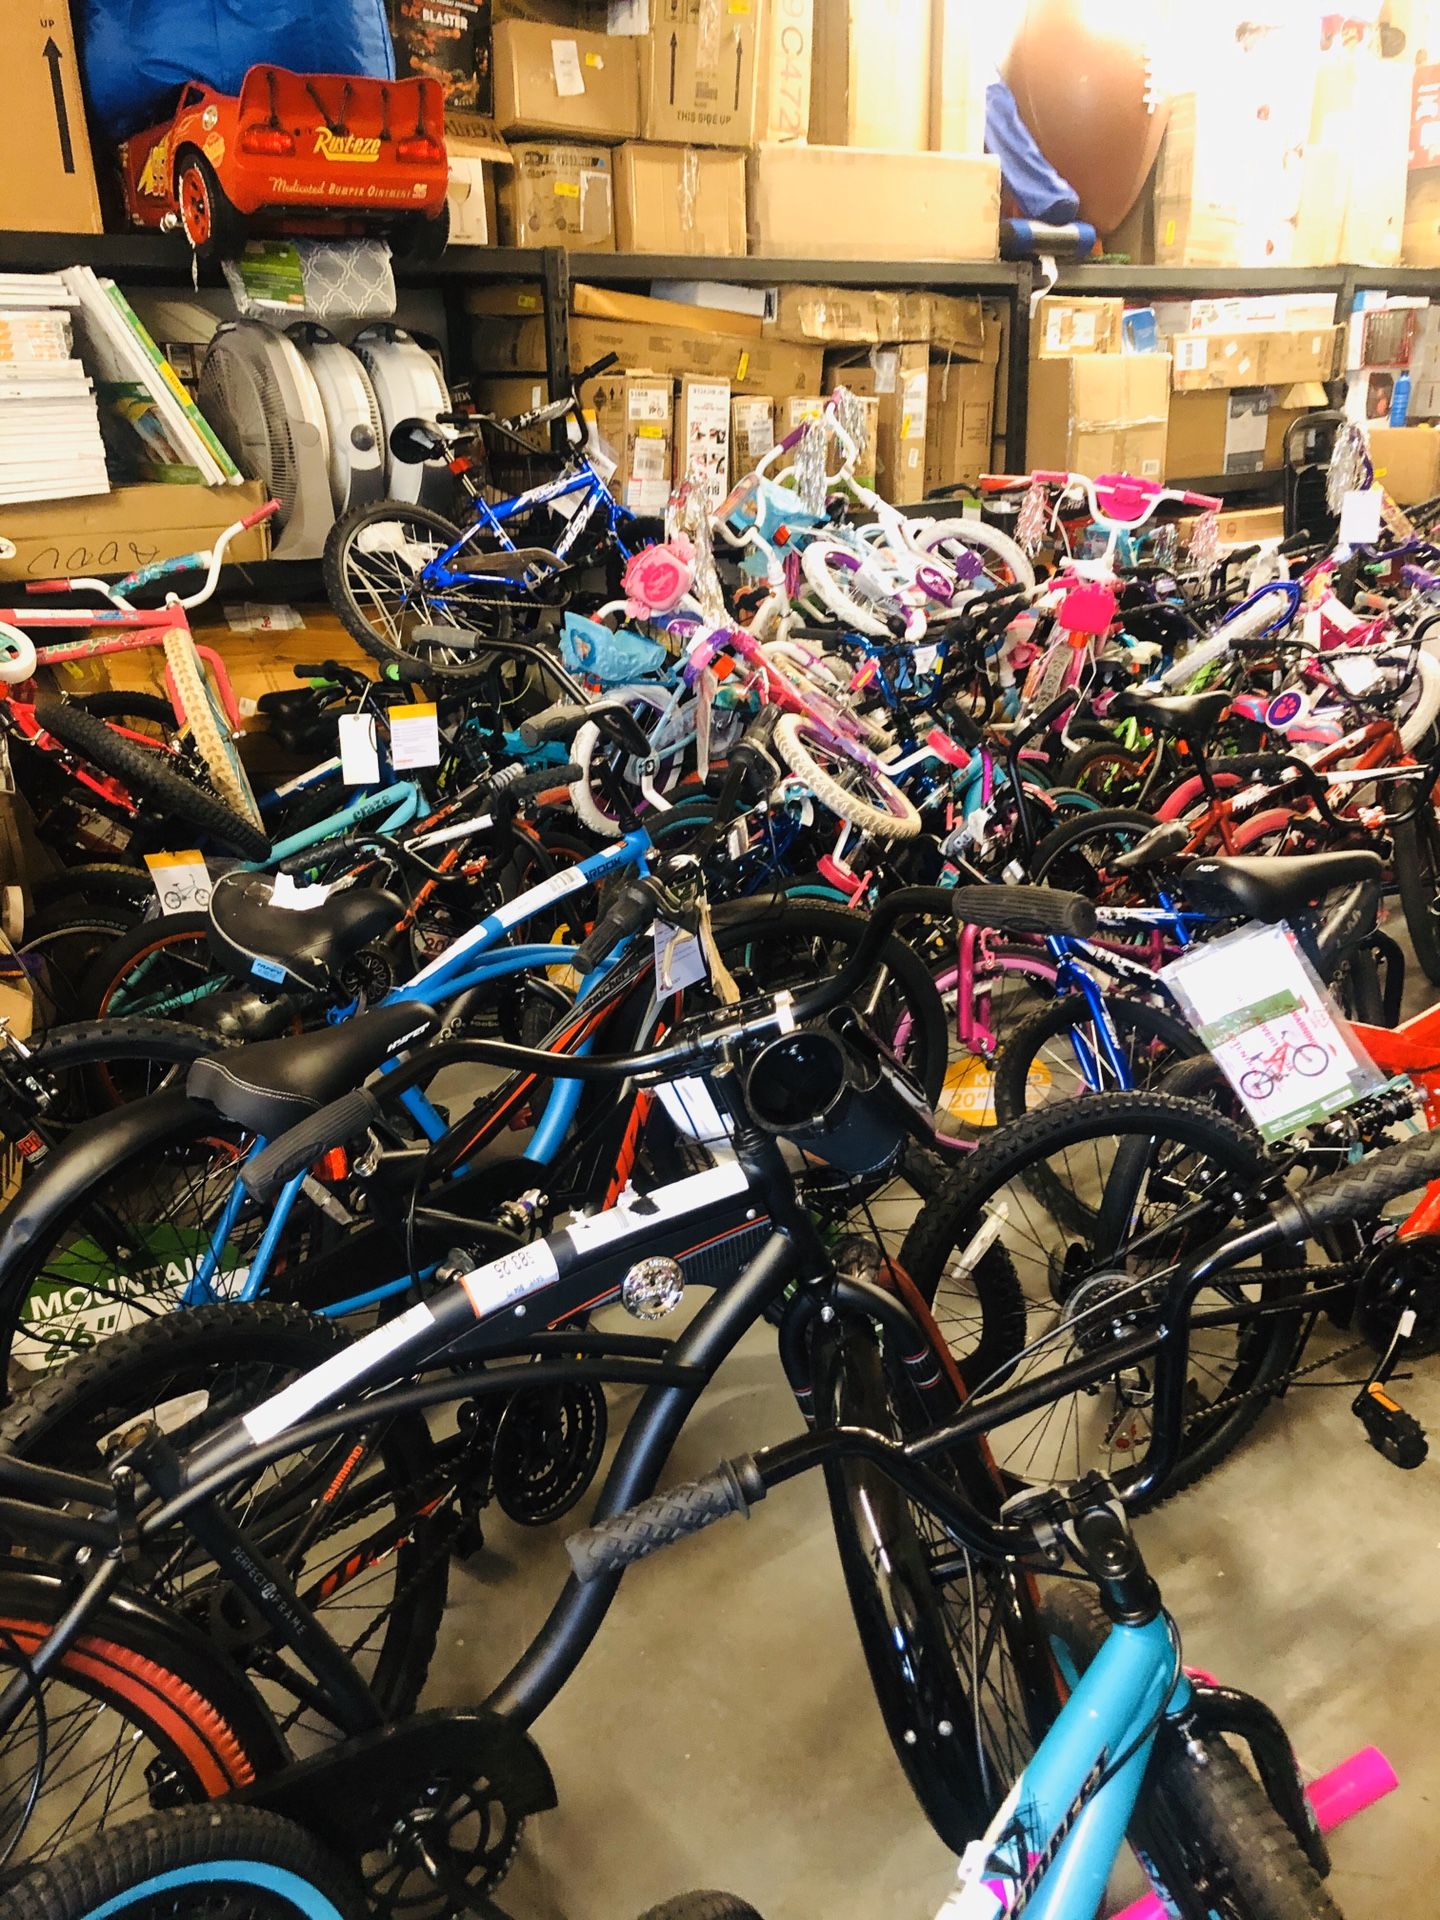 Wholesale bike sale take all 220 New, Used and salvage Kids & Adult Bikes this sale is a take all not selling individual